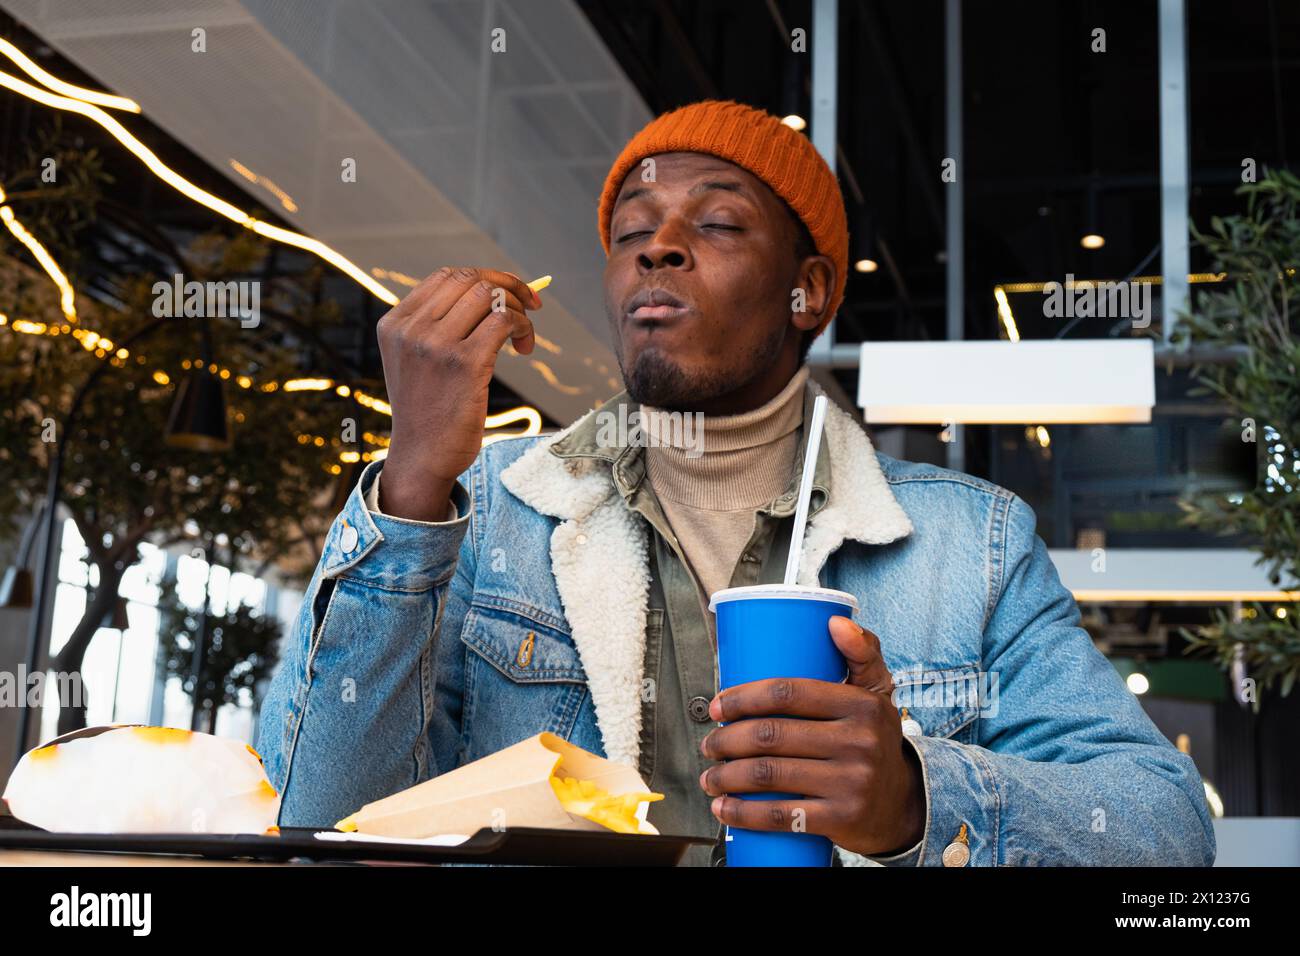 African American man in a denim jacket and orange beanie savors his meal, with a soda cup in hand, in the vibrant ambiance of a contemporary cafe.  Stock Photo